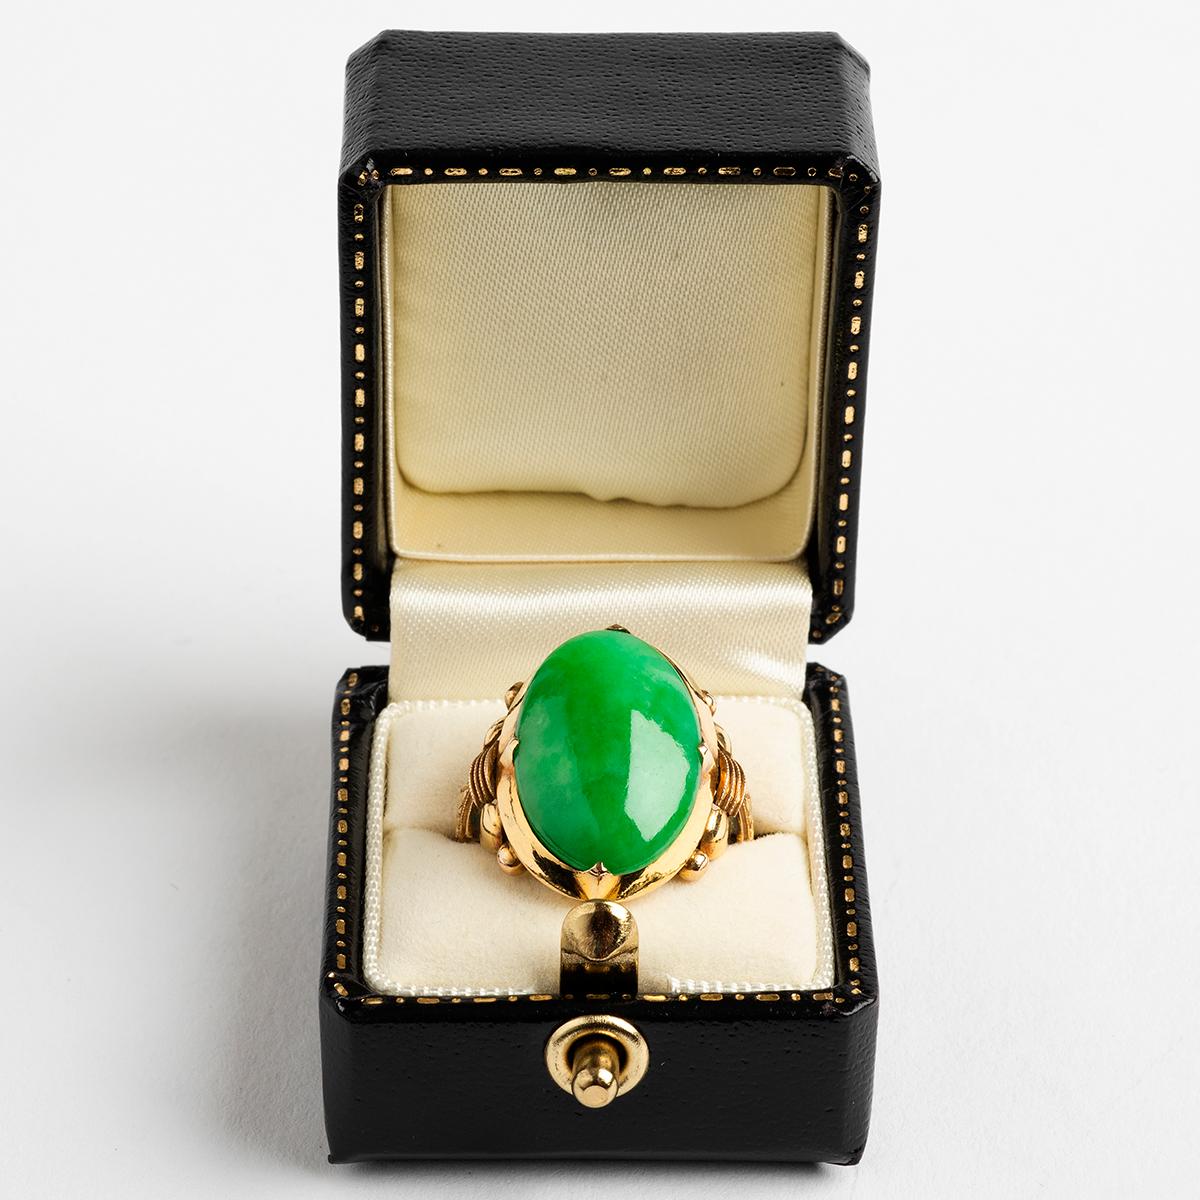 
Our antique jade ring with cabochon set features a 14k yellow gold band. A wonderful quality stone, this would make a superb addition to a collection, the ring size is K.

A unique piece within our carefully curated Vintage & Prestige fine